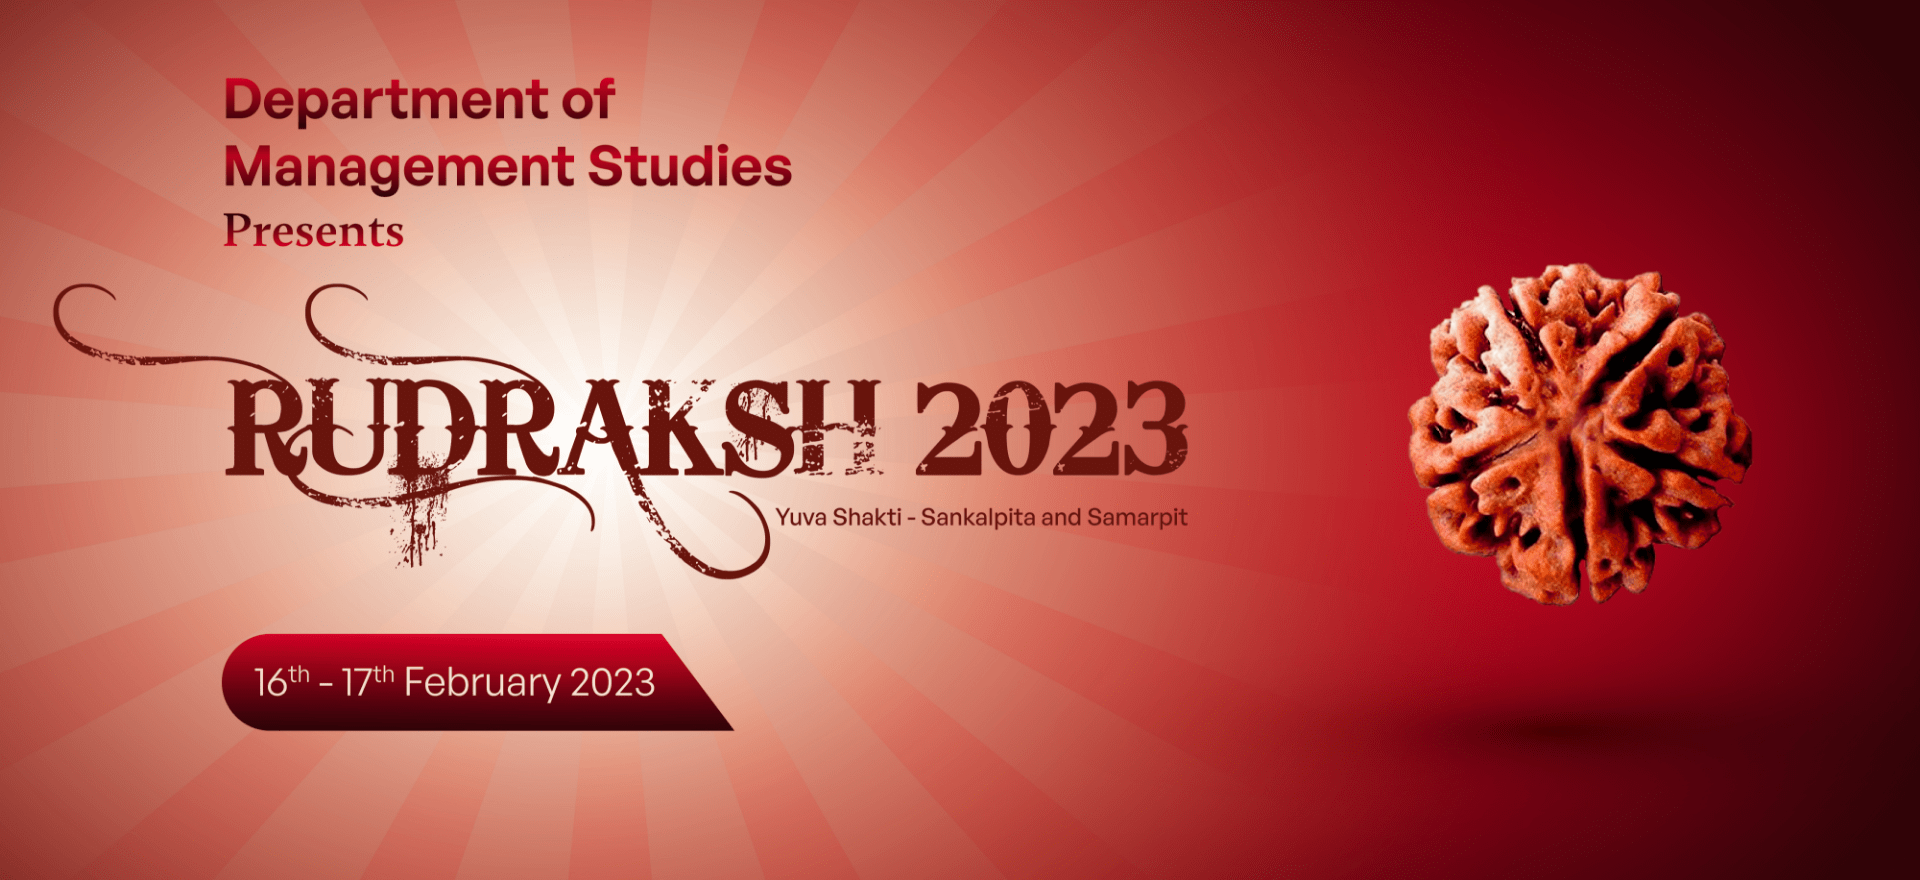 RUDRAKSH 2023 - An event at New Horizon College of Engineering Bangalore